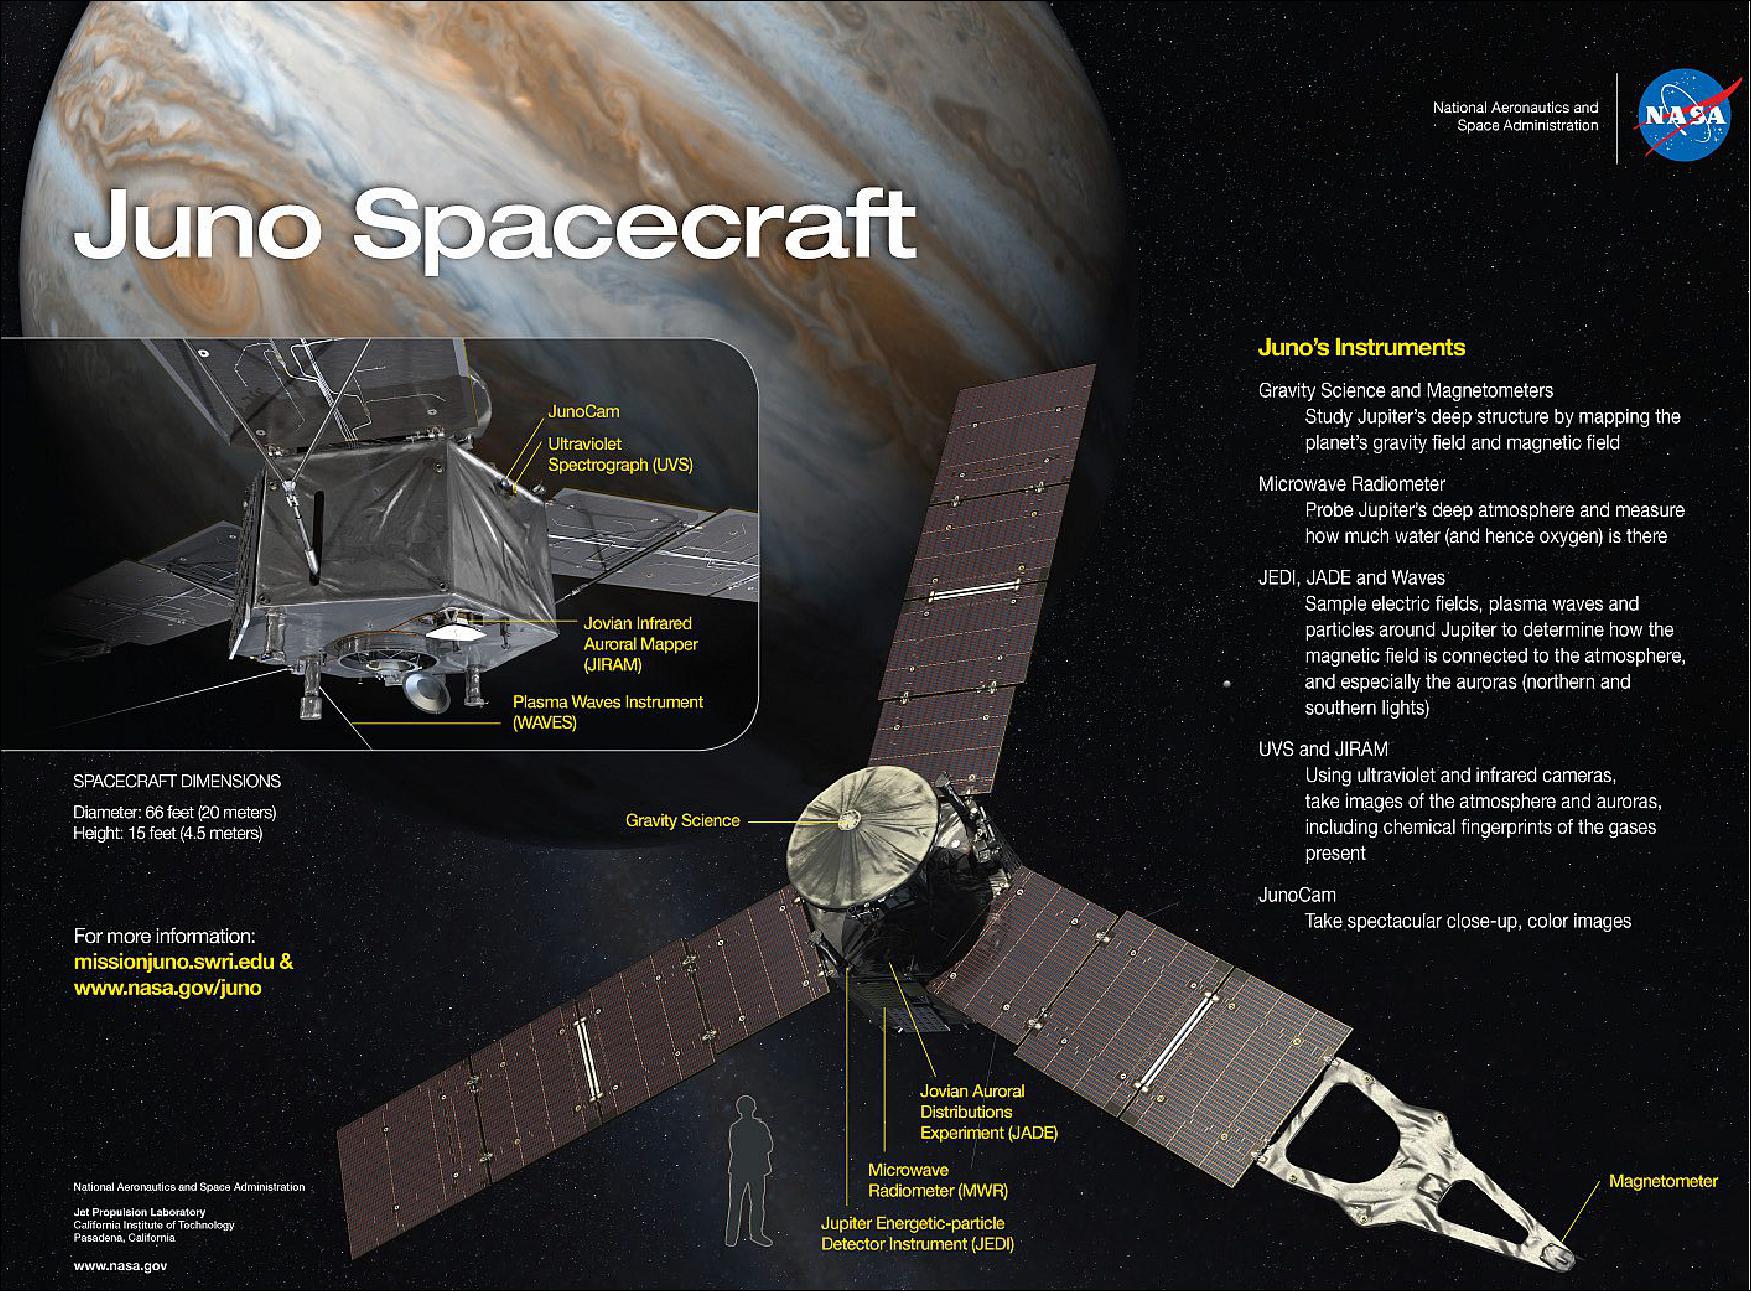 Figure 2: The Juno spacecraft and its science instruments (image credit: NASA/JPL)